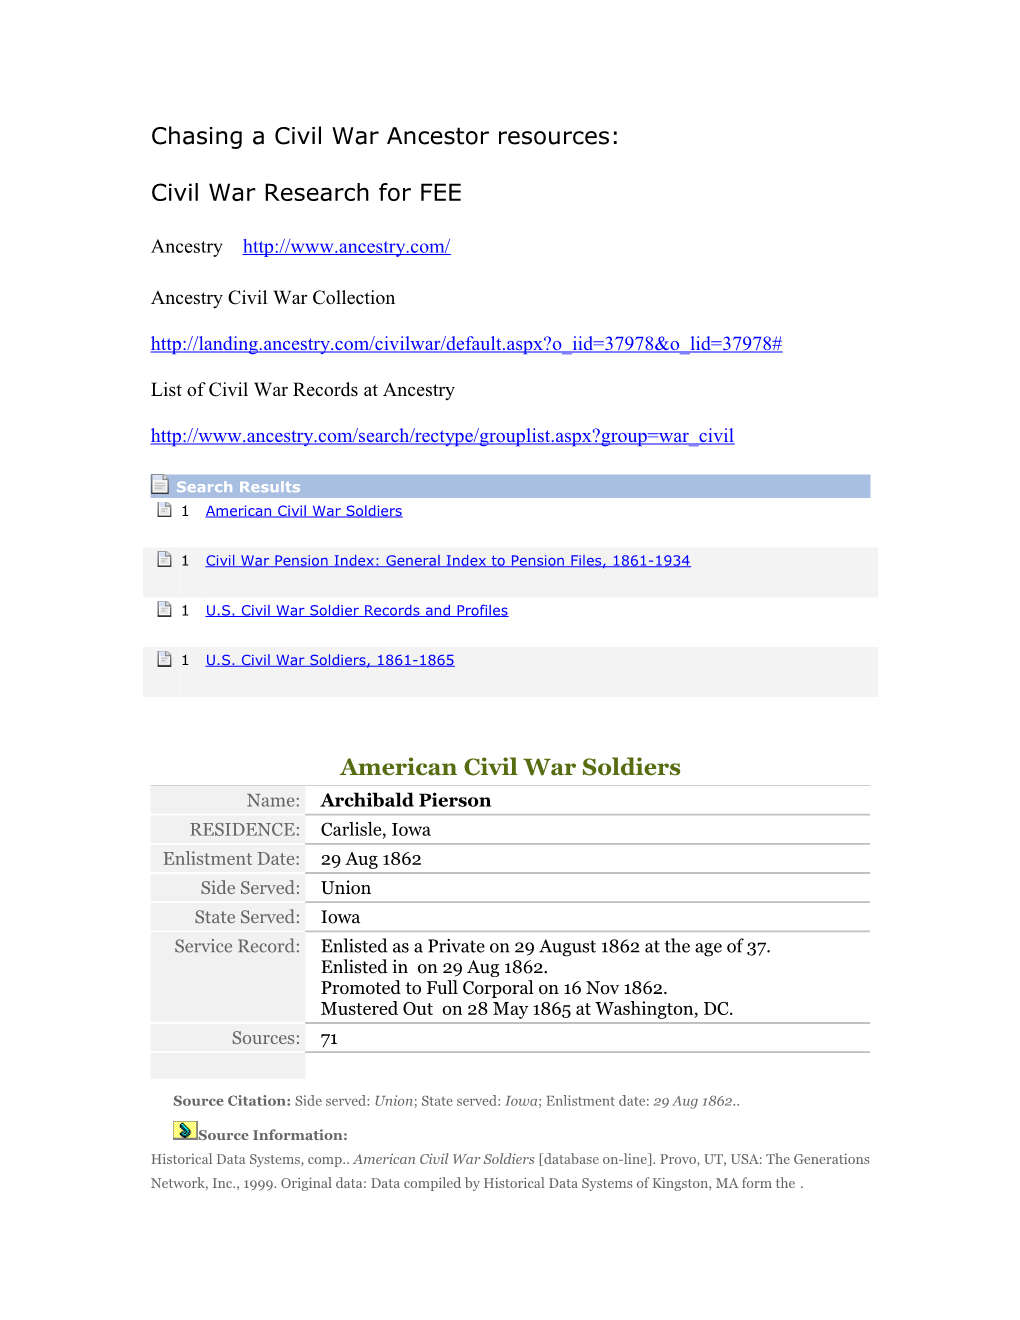 Civil War Research for FEE